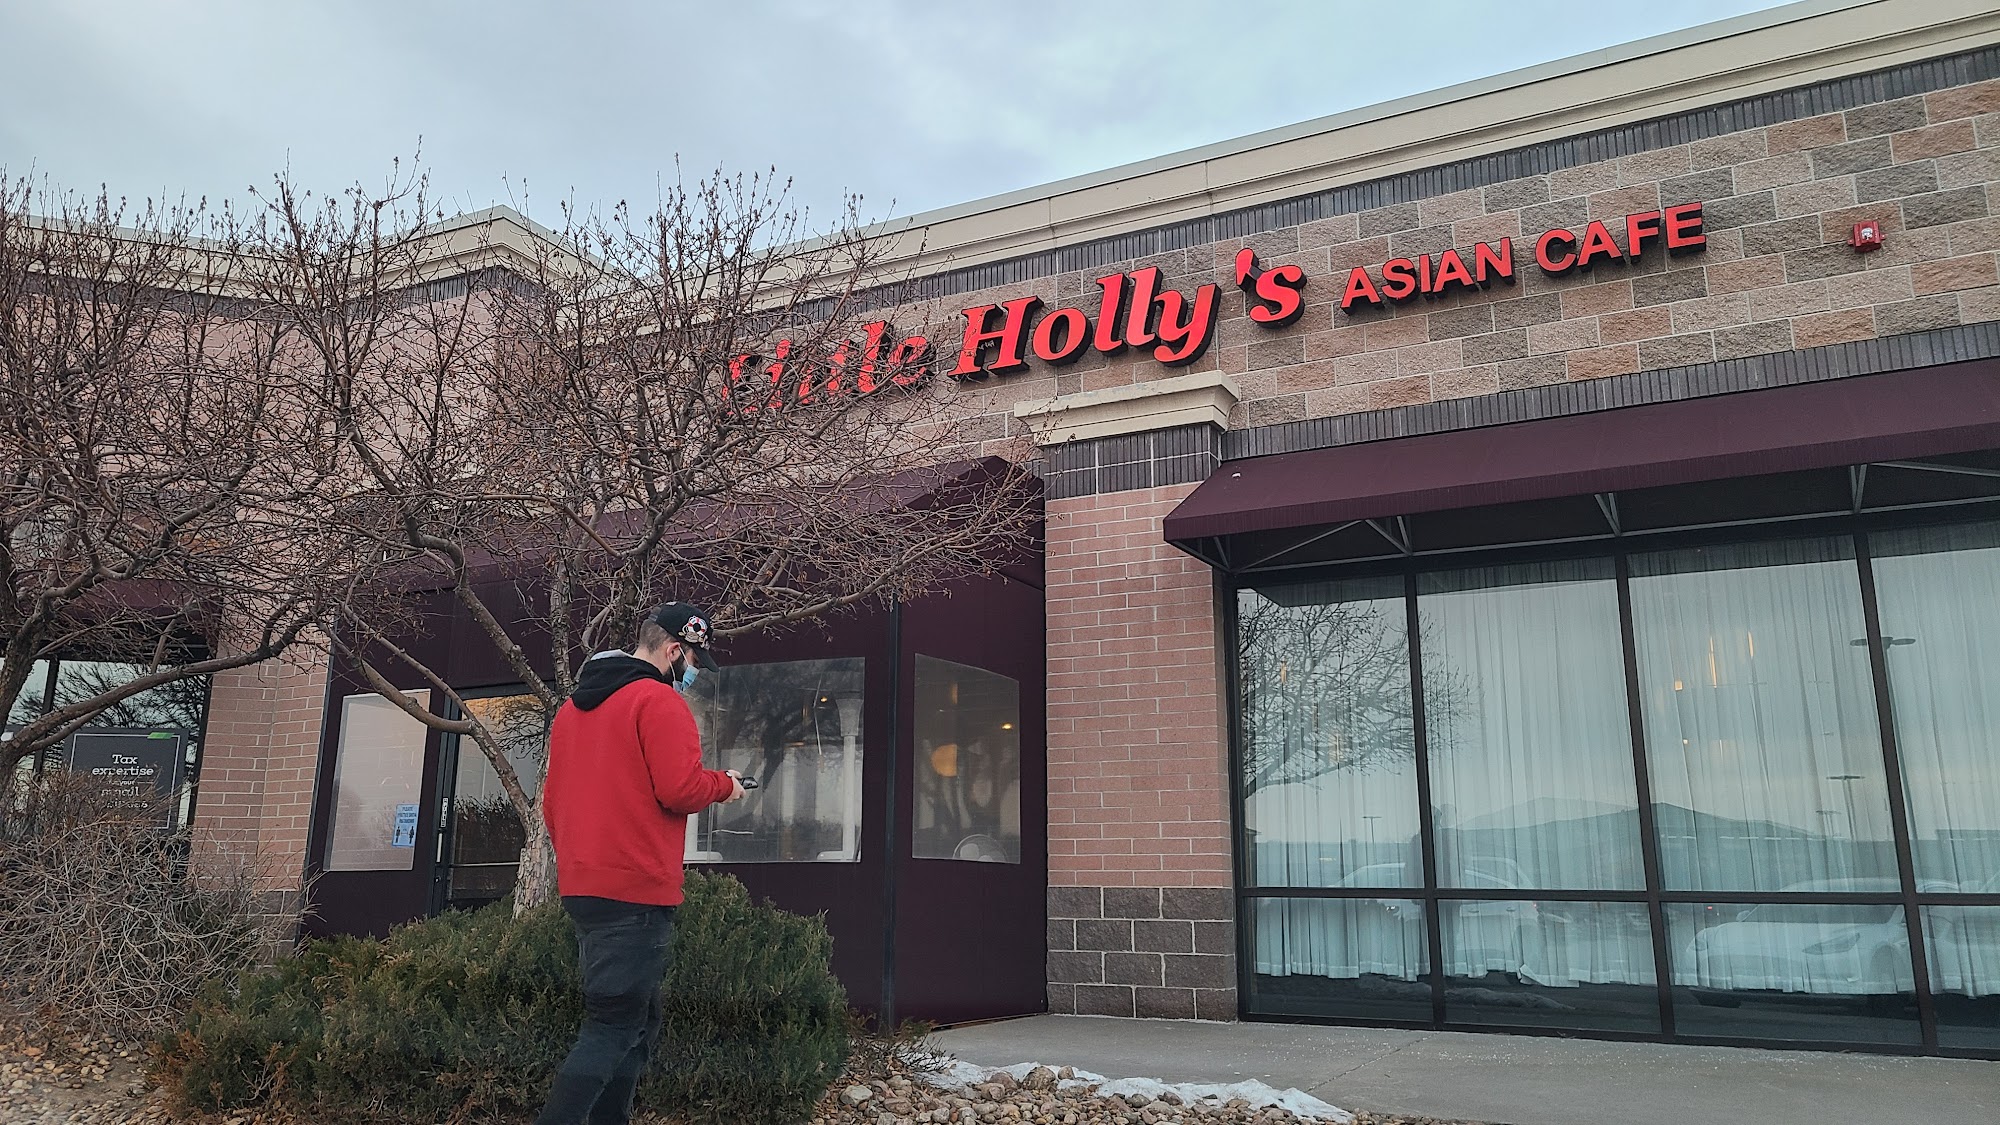 Little Holly's Asia Cafe